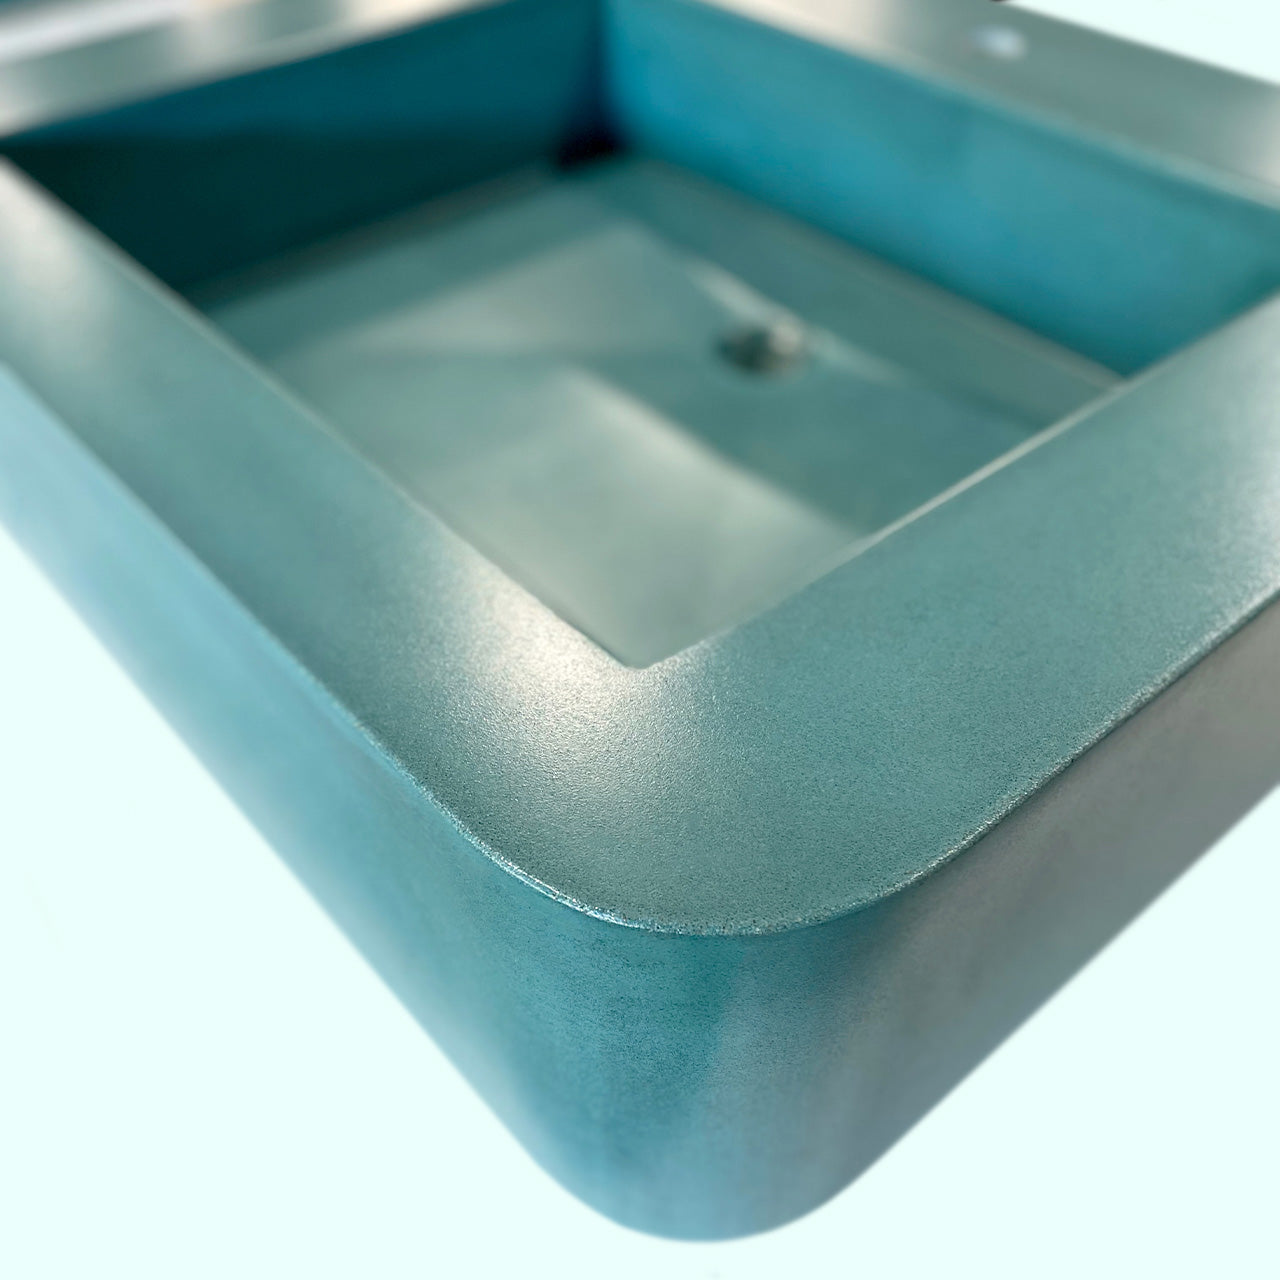 Teal concrete sink ready to be hung on the wall.